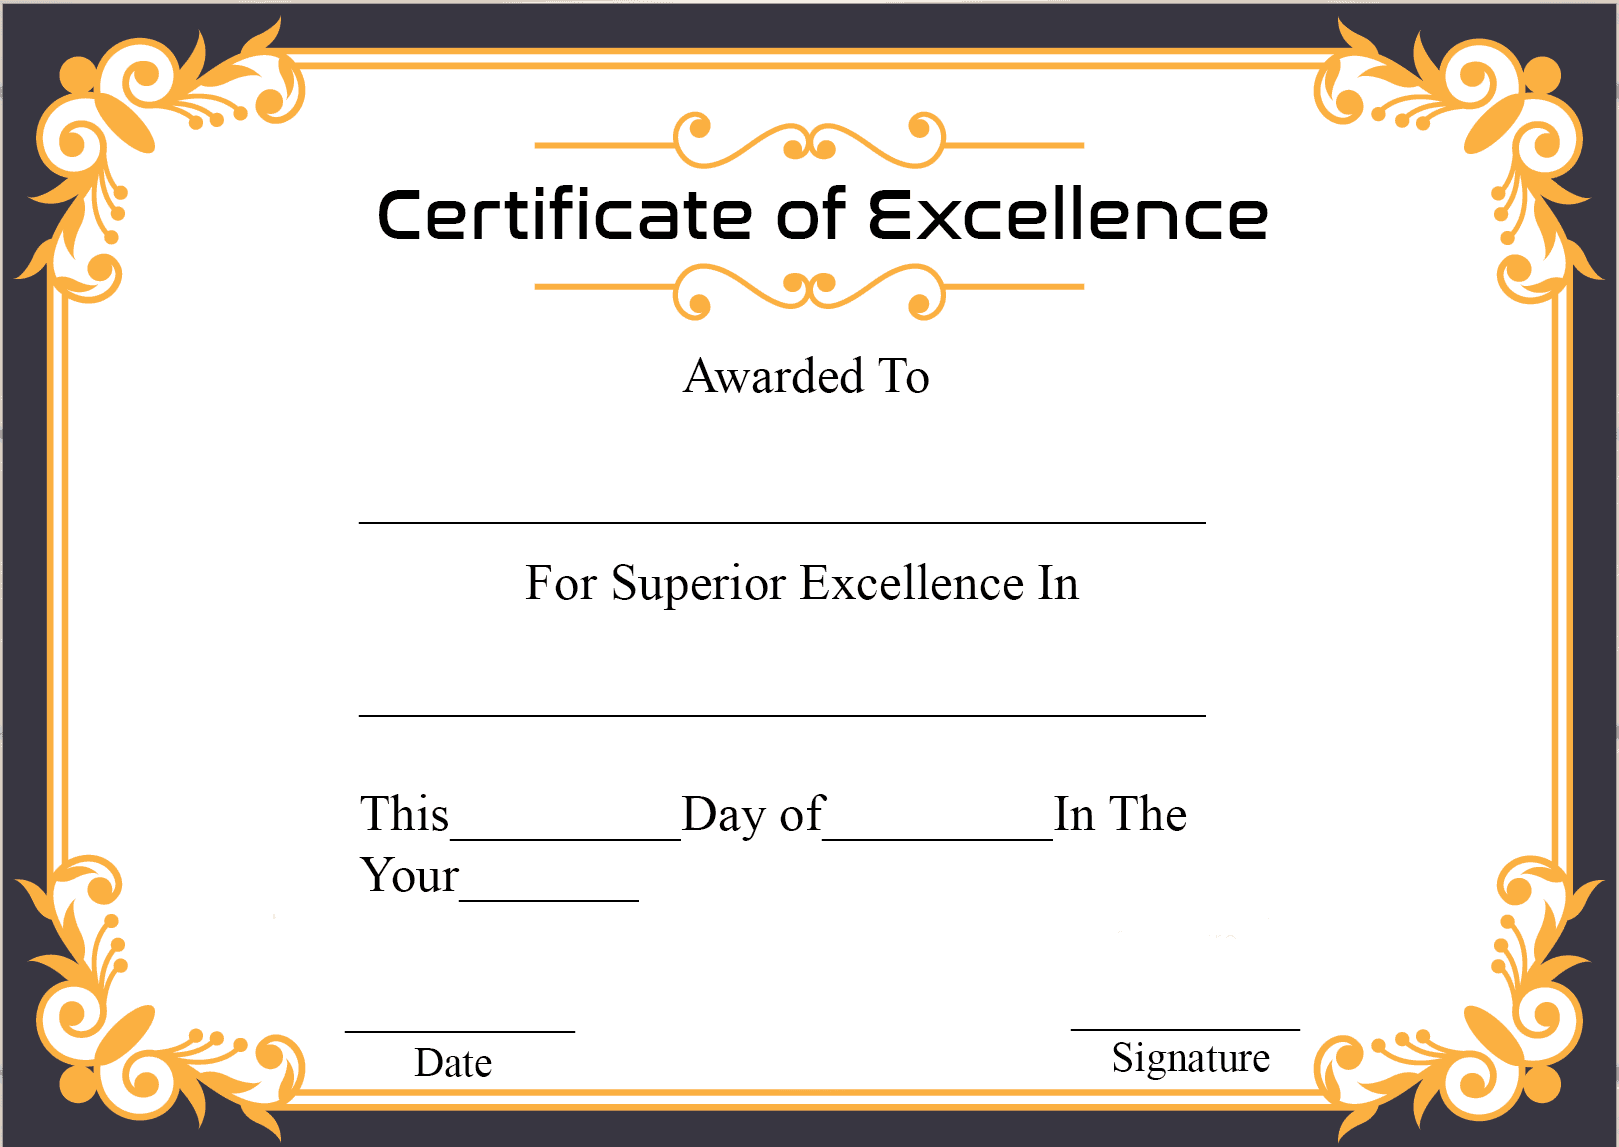 Certificate Of Excellence Template Free Download Creative